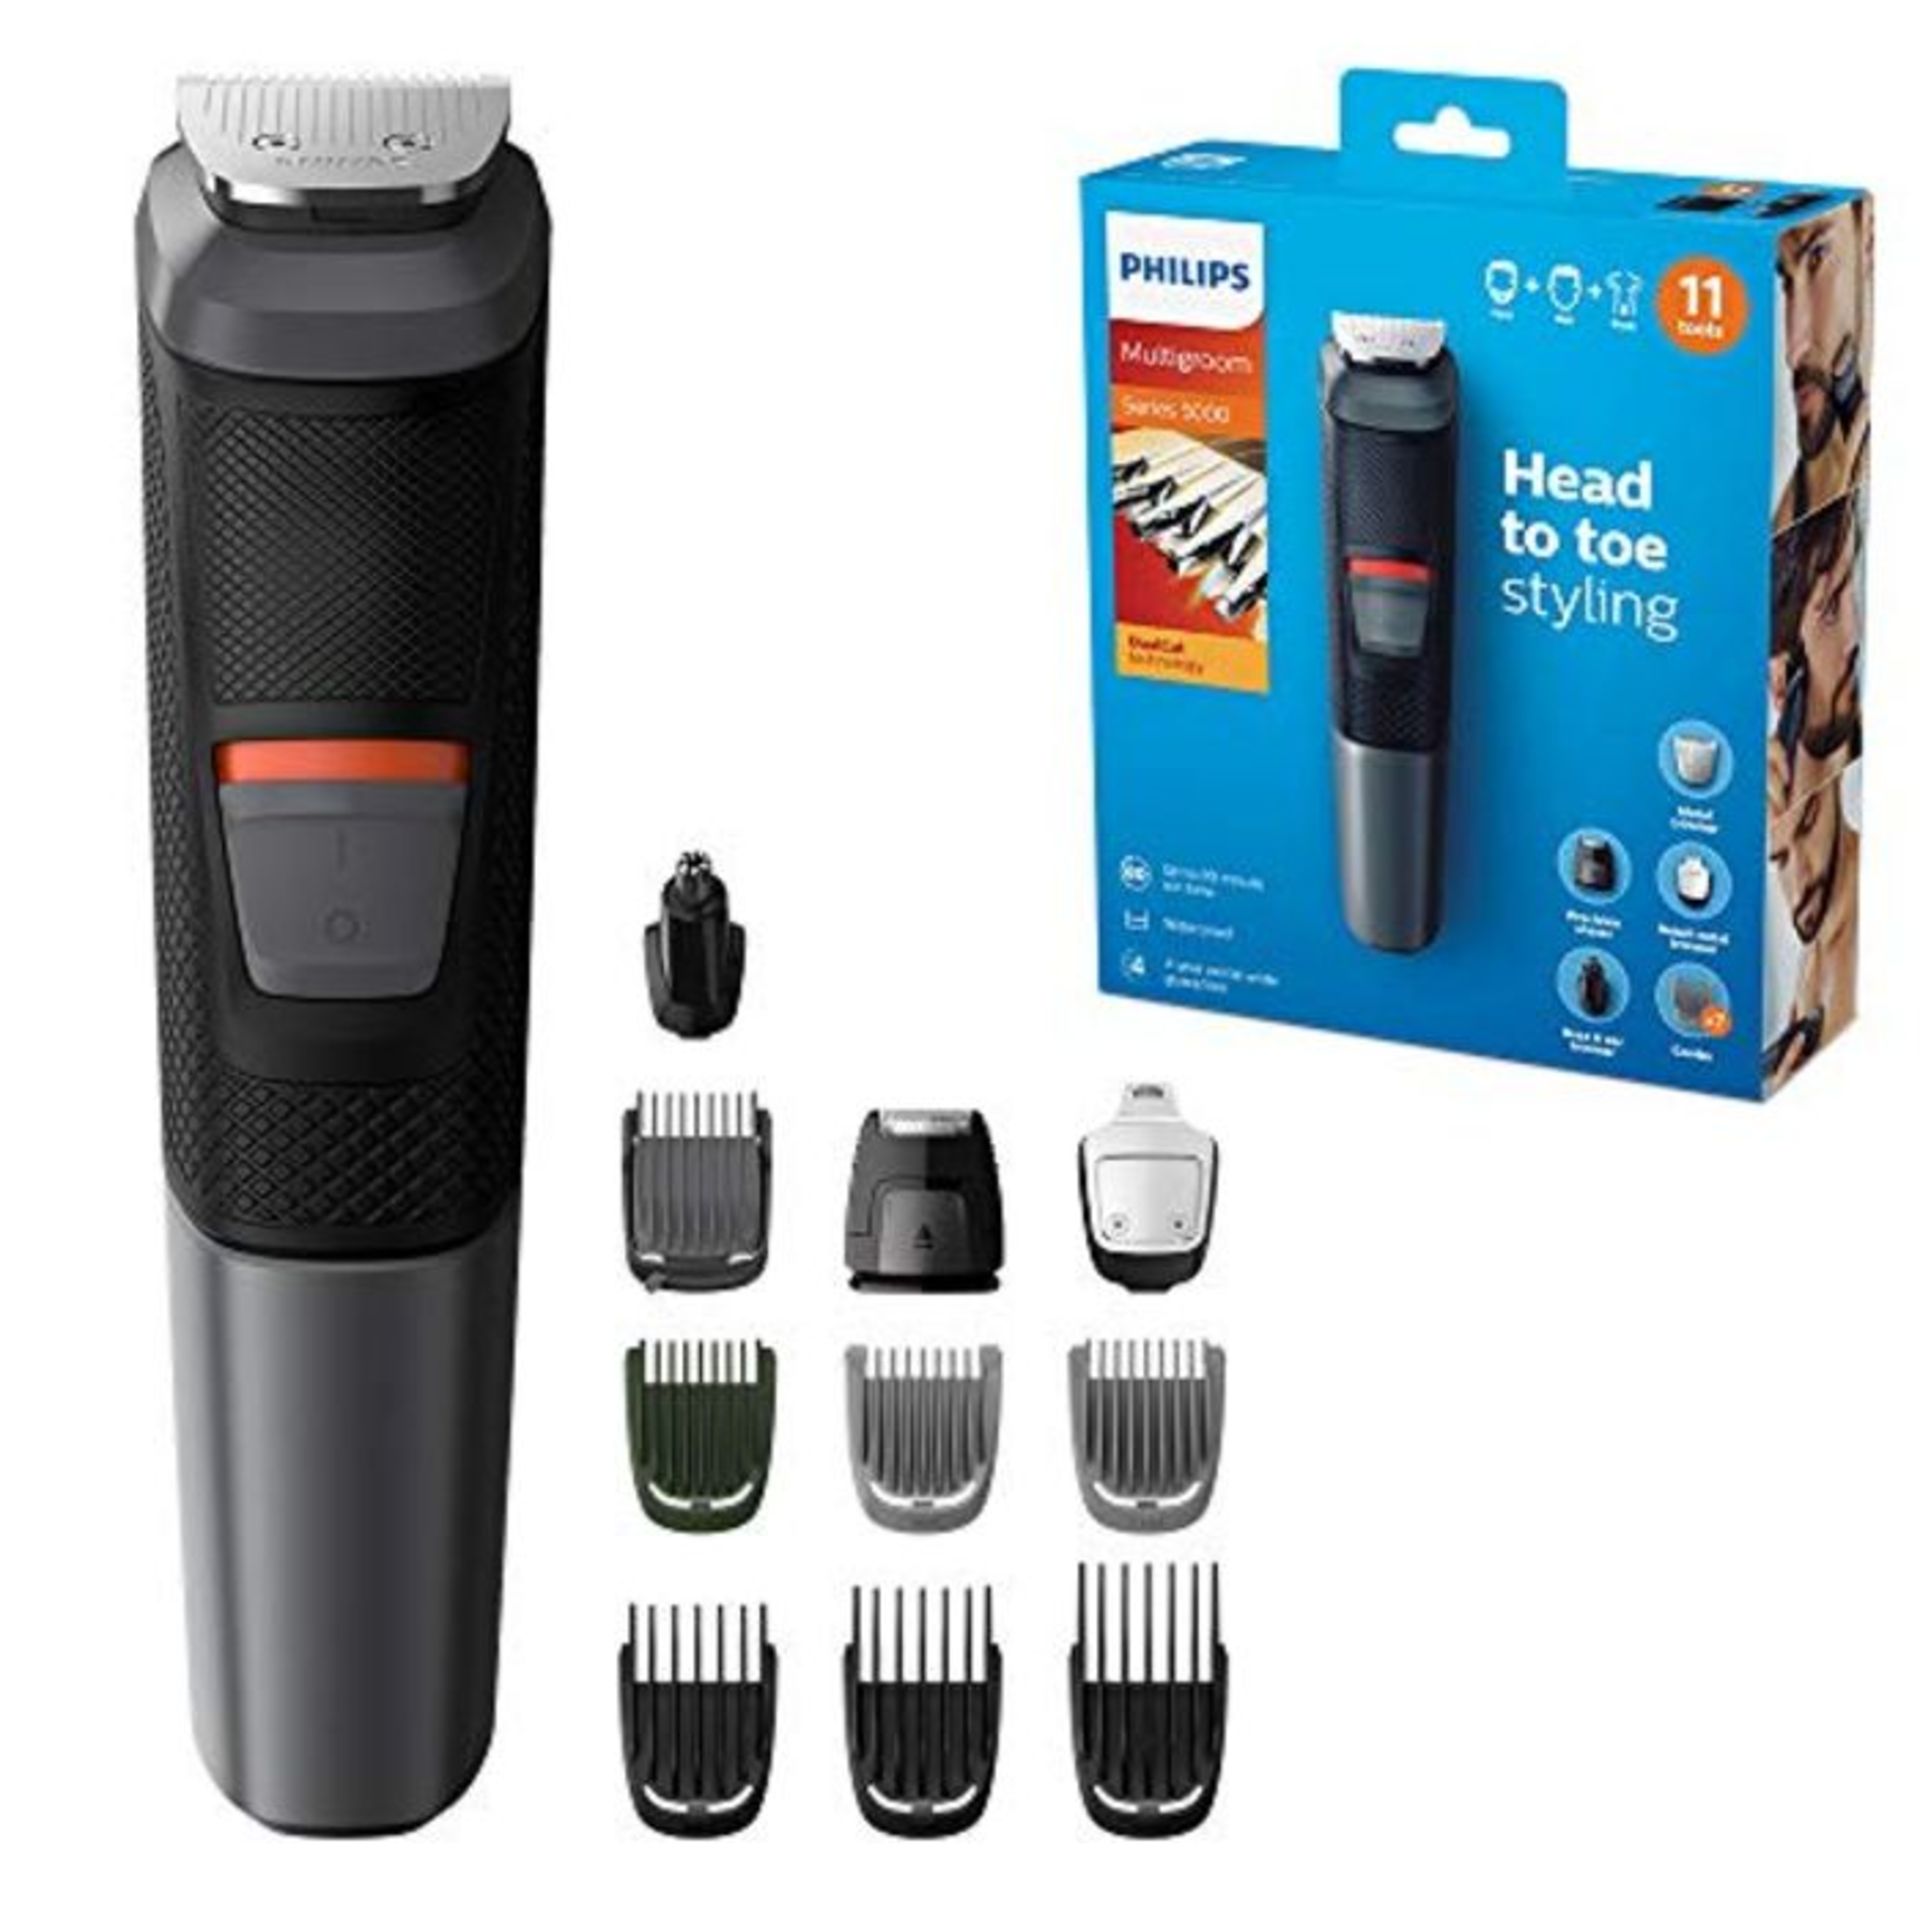 Philips 11-in-1 All-In-One Trimmer, Series 5000 Grooming Kit, Beard Trimmer, Hair Clip